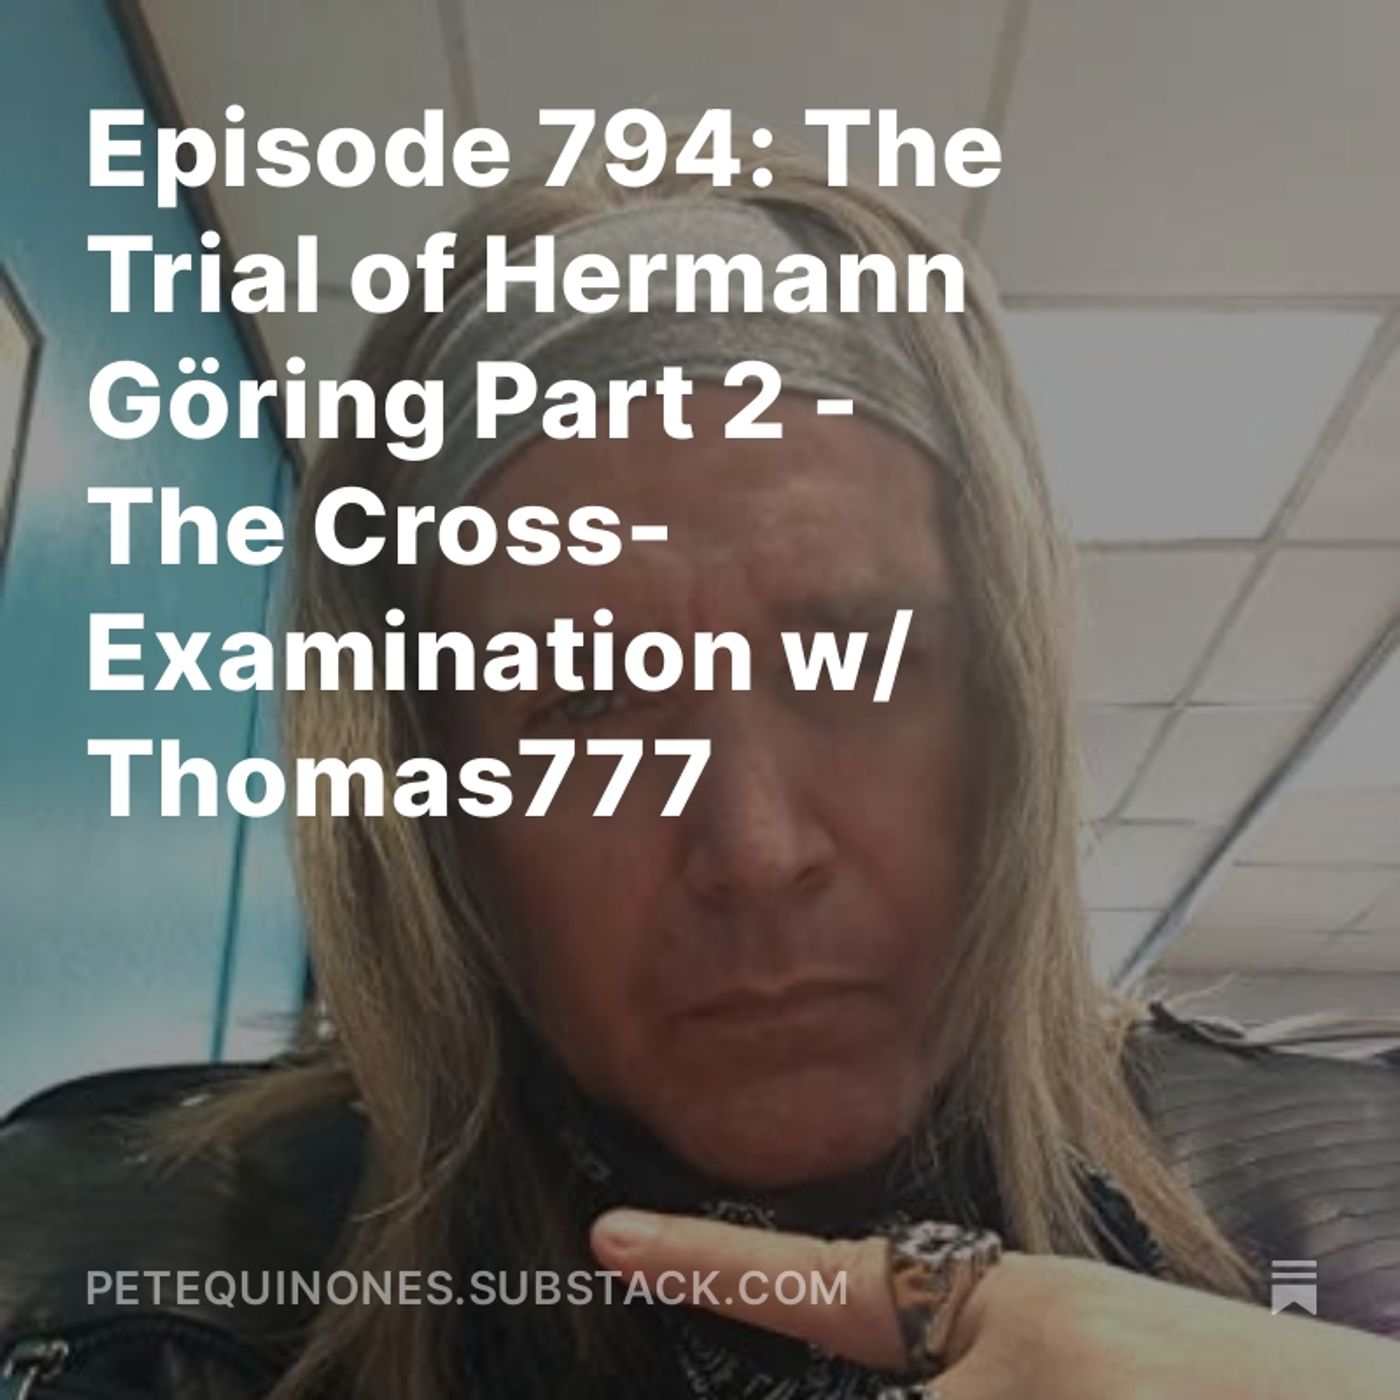 Episode 794: The WW2 Series Part 21 - The Trial of Hermann Göring Part 2 - The Cross-Examination w/ Thomas777